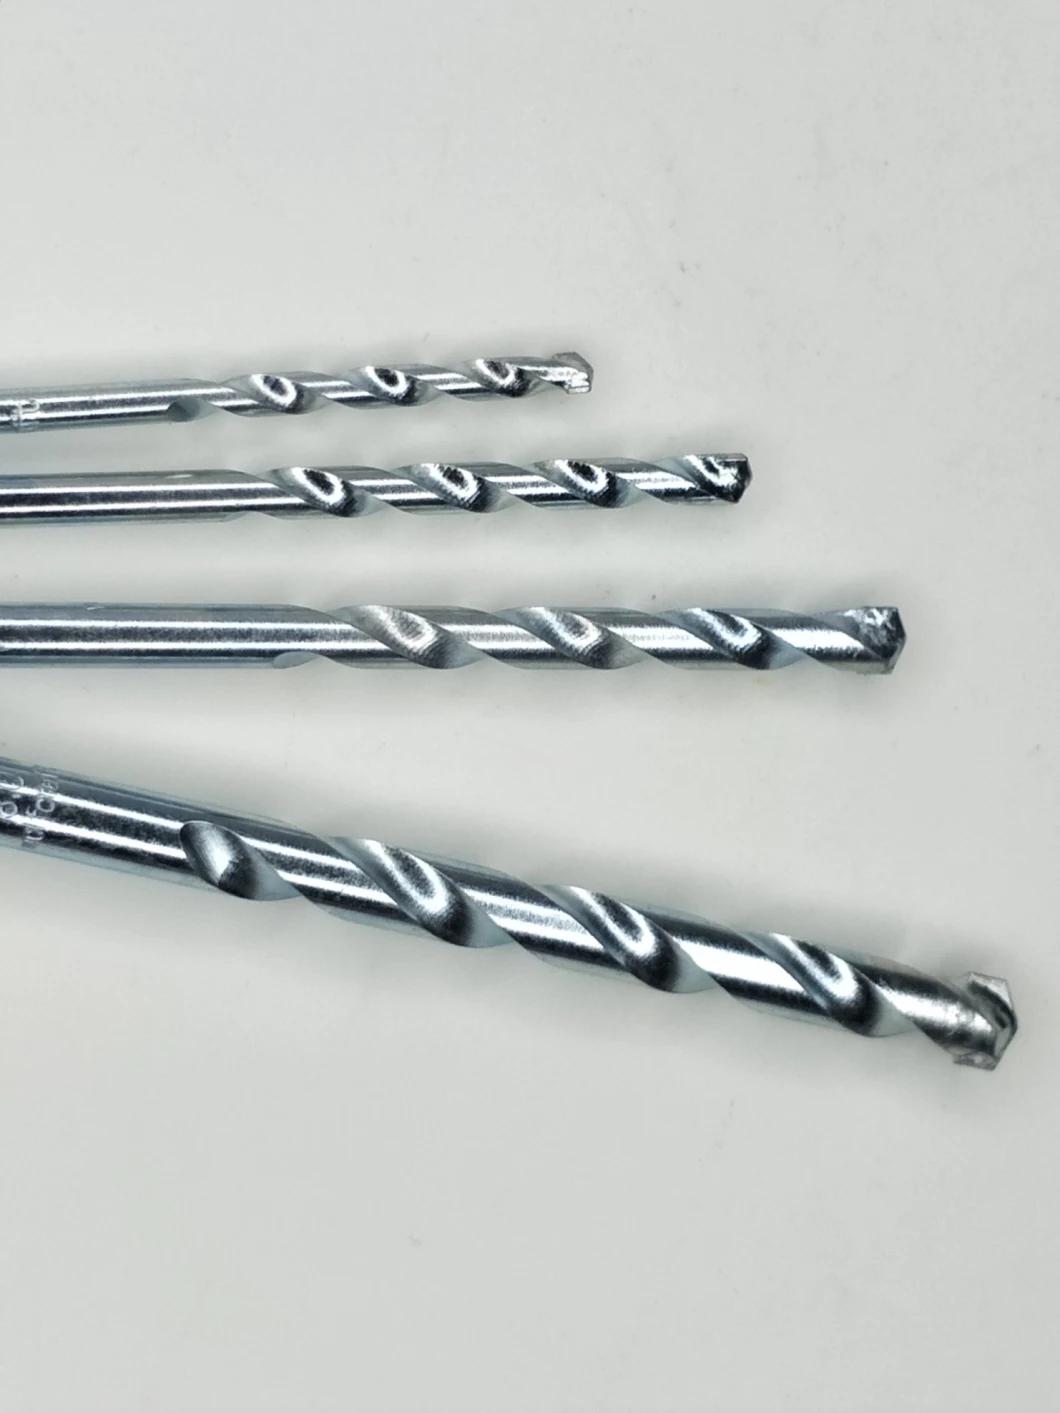 Discounted Price Machine Tool Masonry Drill Bit in All Sizes